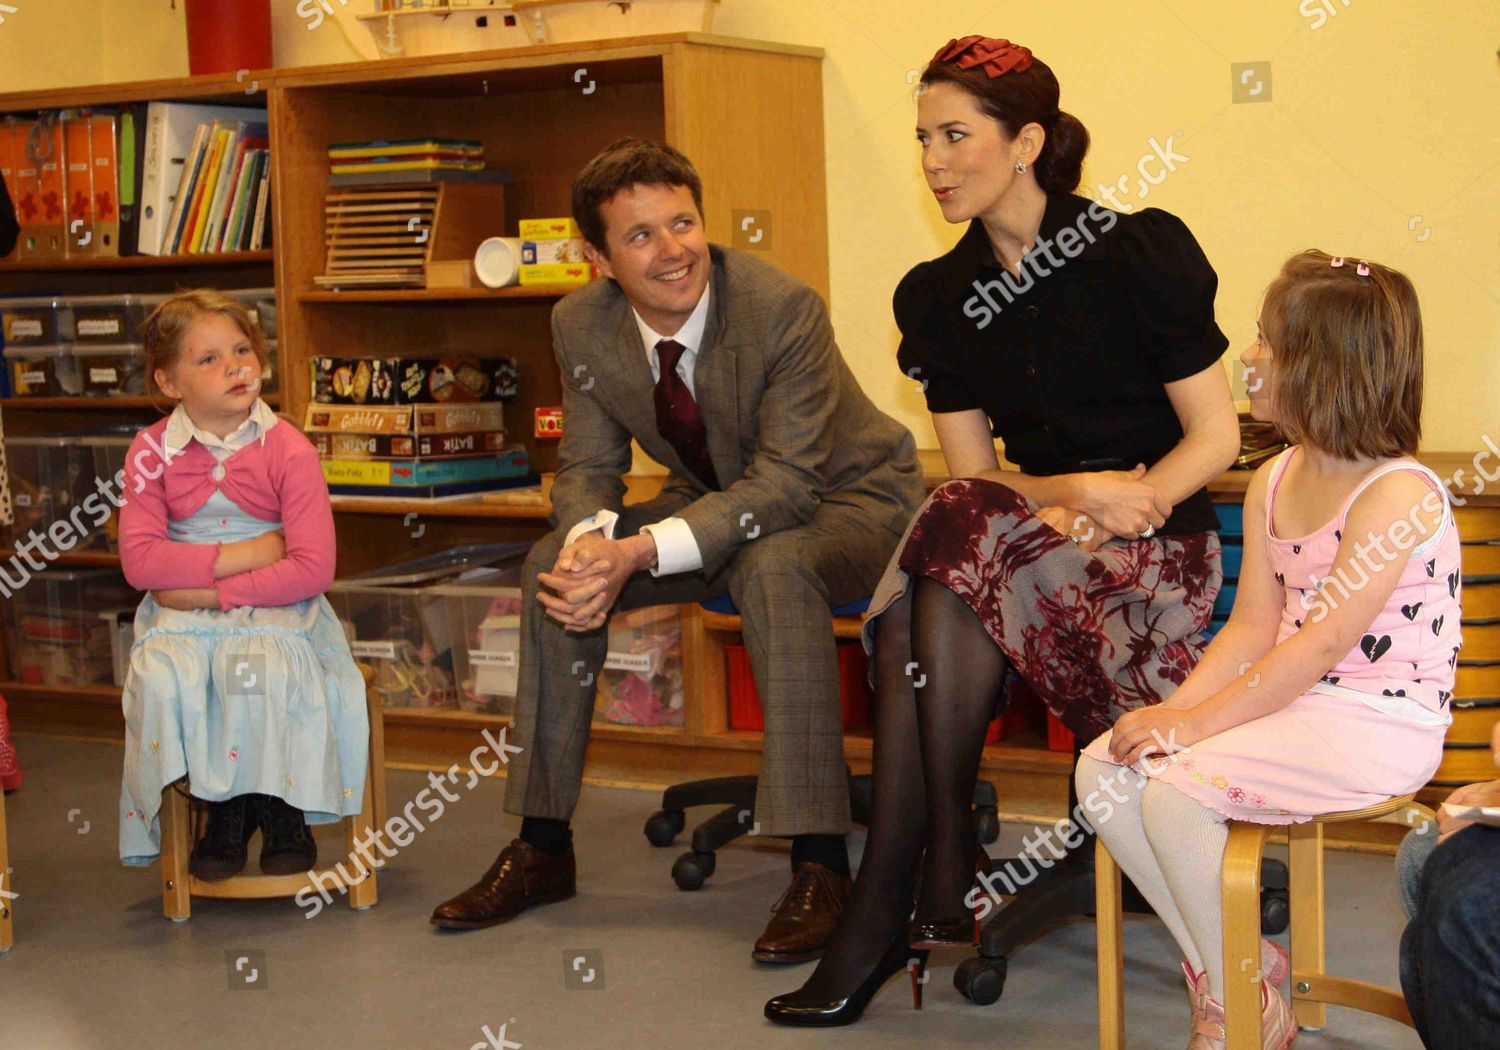 crown-prince-frederik-and-crown-princess-mary-visiting-a-danish-school-in-flensburg-germany-shutterstock-editorial-918974j.jpg